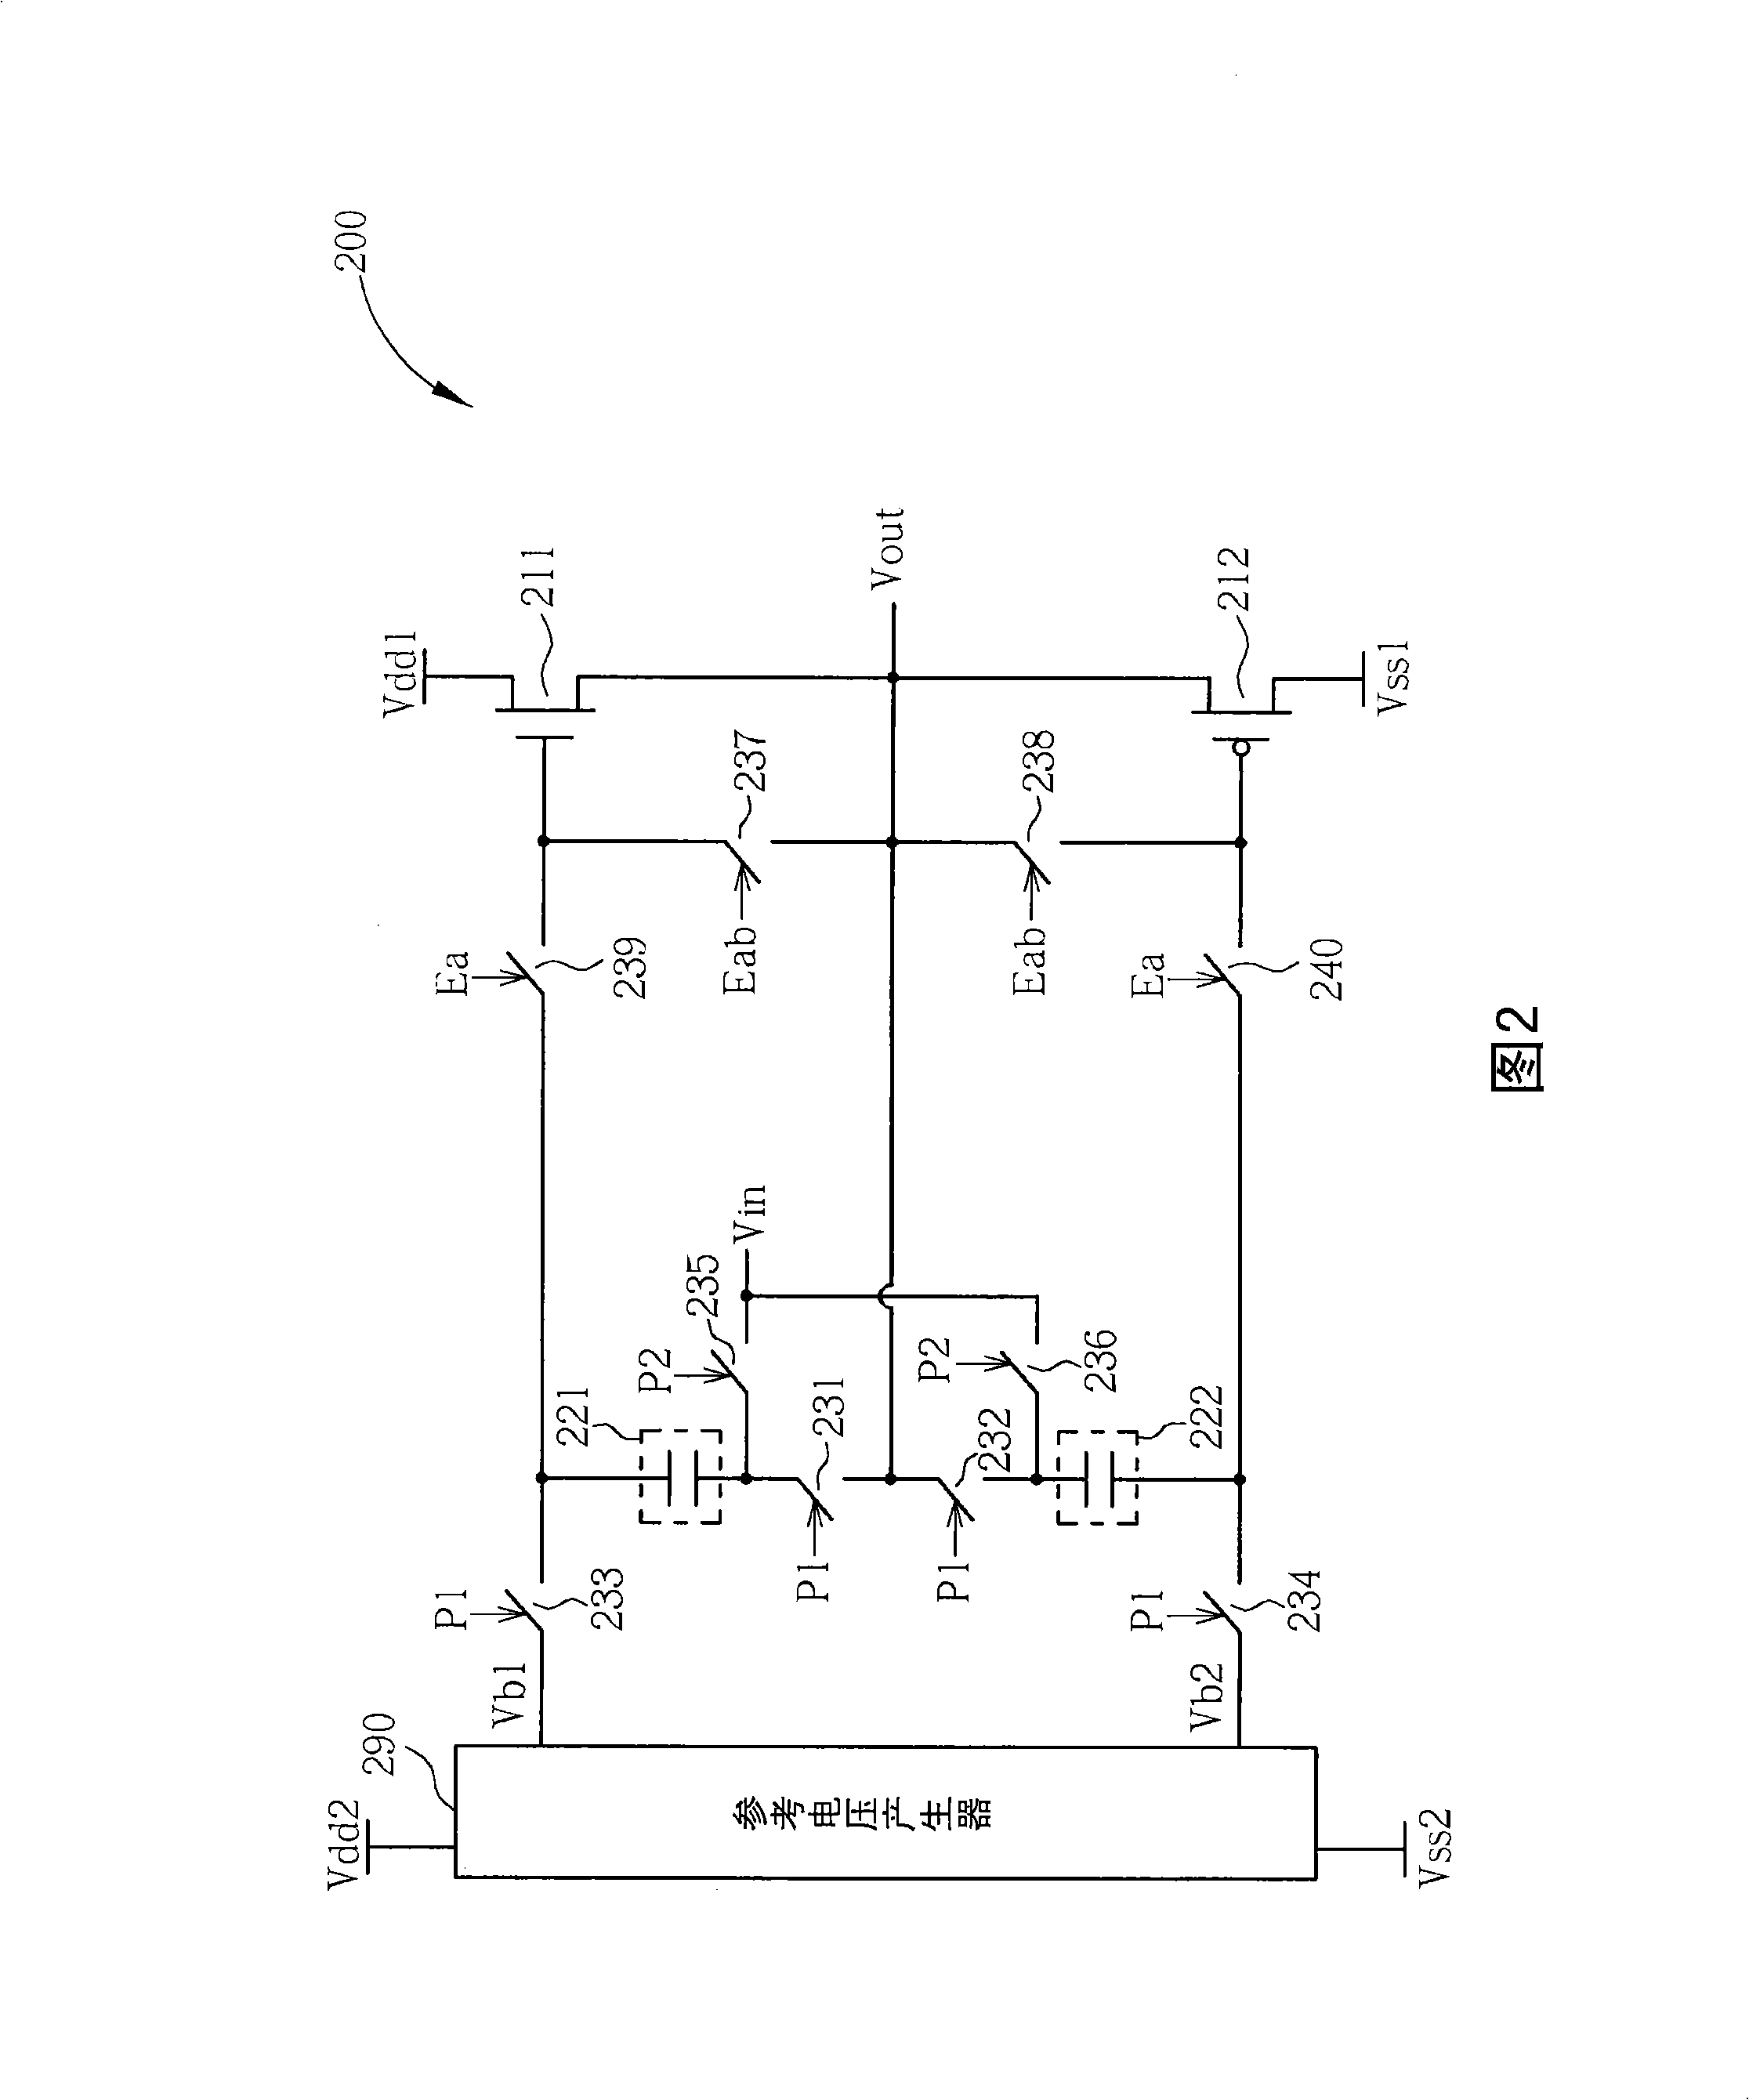 Simulation buffer with voltage compensation mechanism